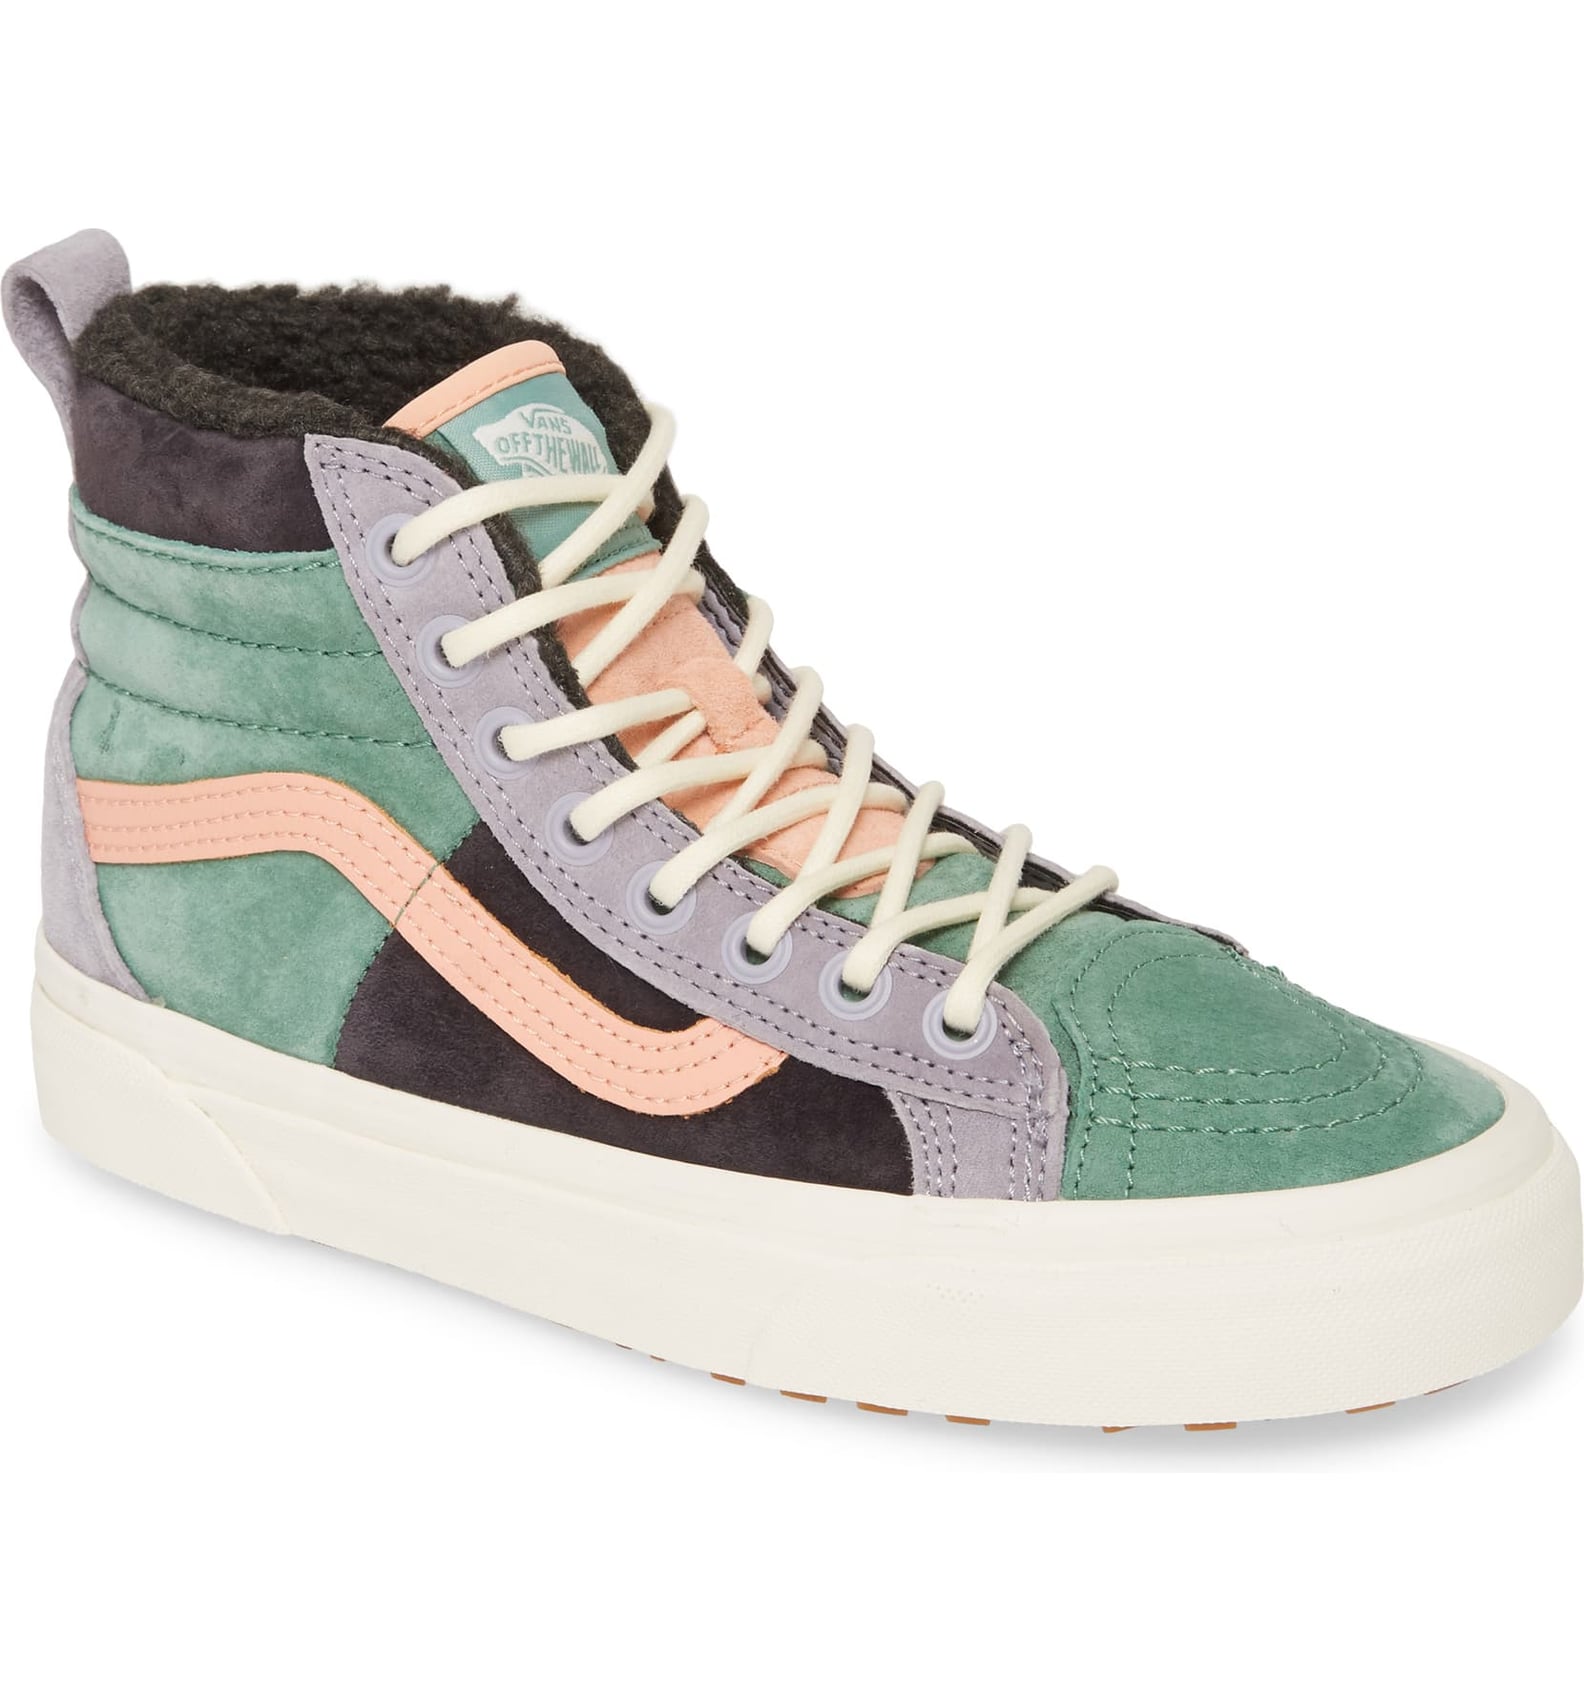 The Coolest Vans Sneakers and Custom Shoes on the Internet | POPSUGAR ...